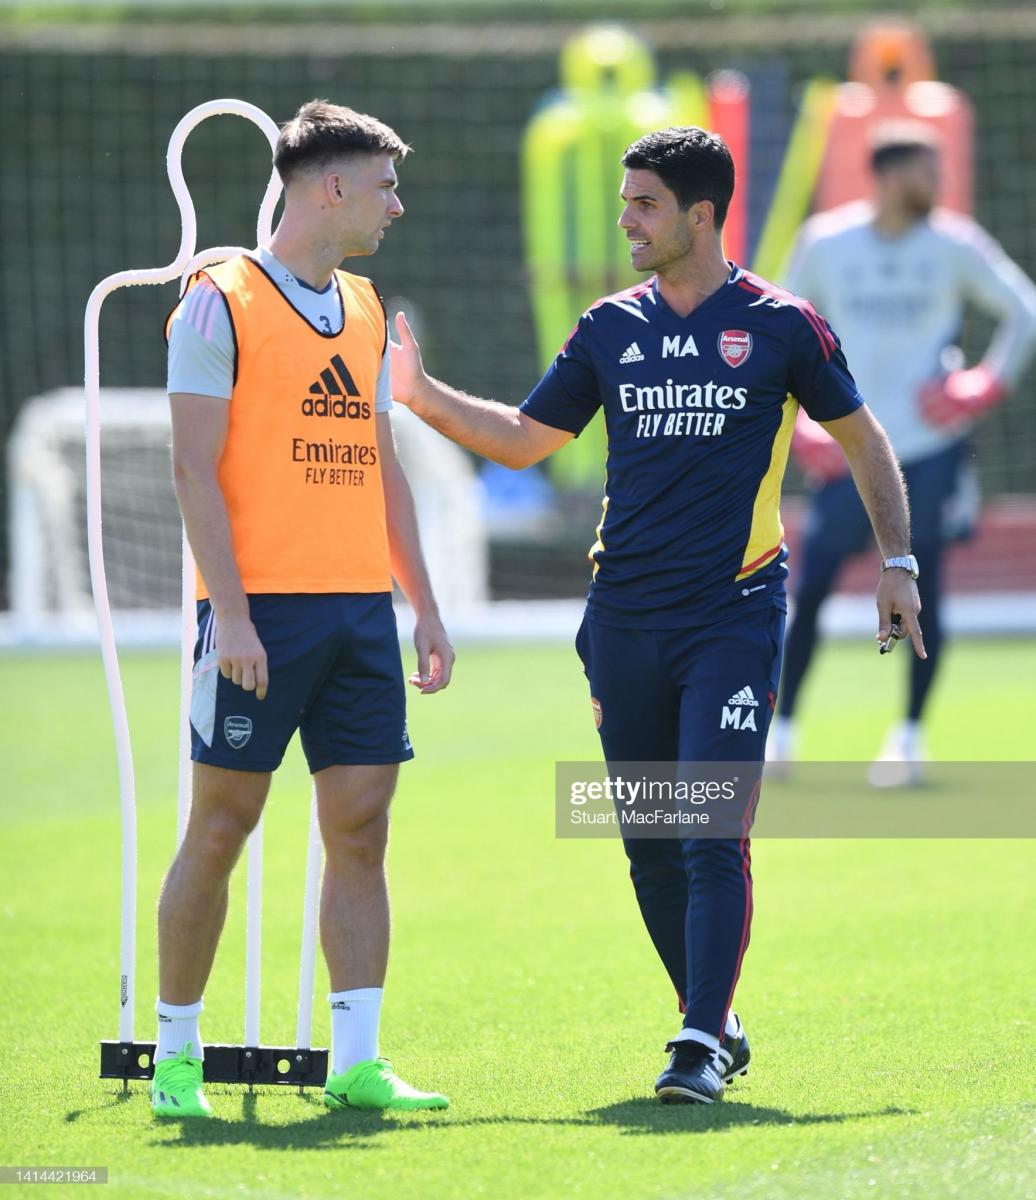 ST ALBANS, ENGLAND - AUGUST 12: Arsenal manager Mikel Arteta talks to Kieran Tierney during a training session at London Colney on August 12, 2022 in St Albans, England. (Photo by Stuart MacFarlane/Arsenal FC via Getty Images)